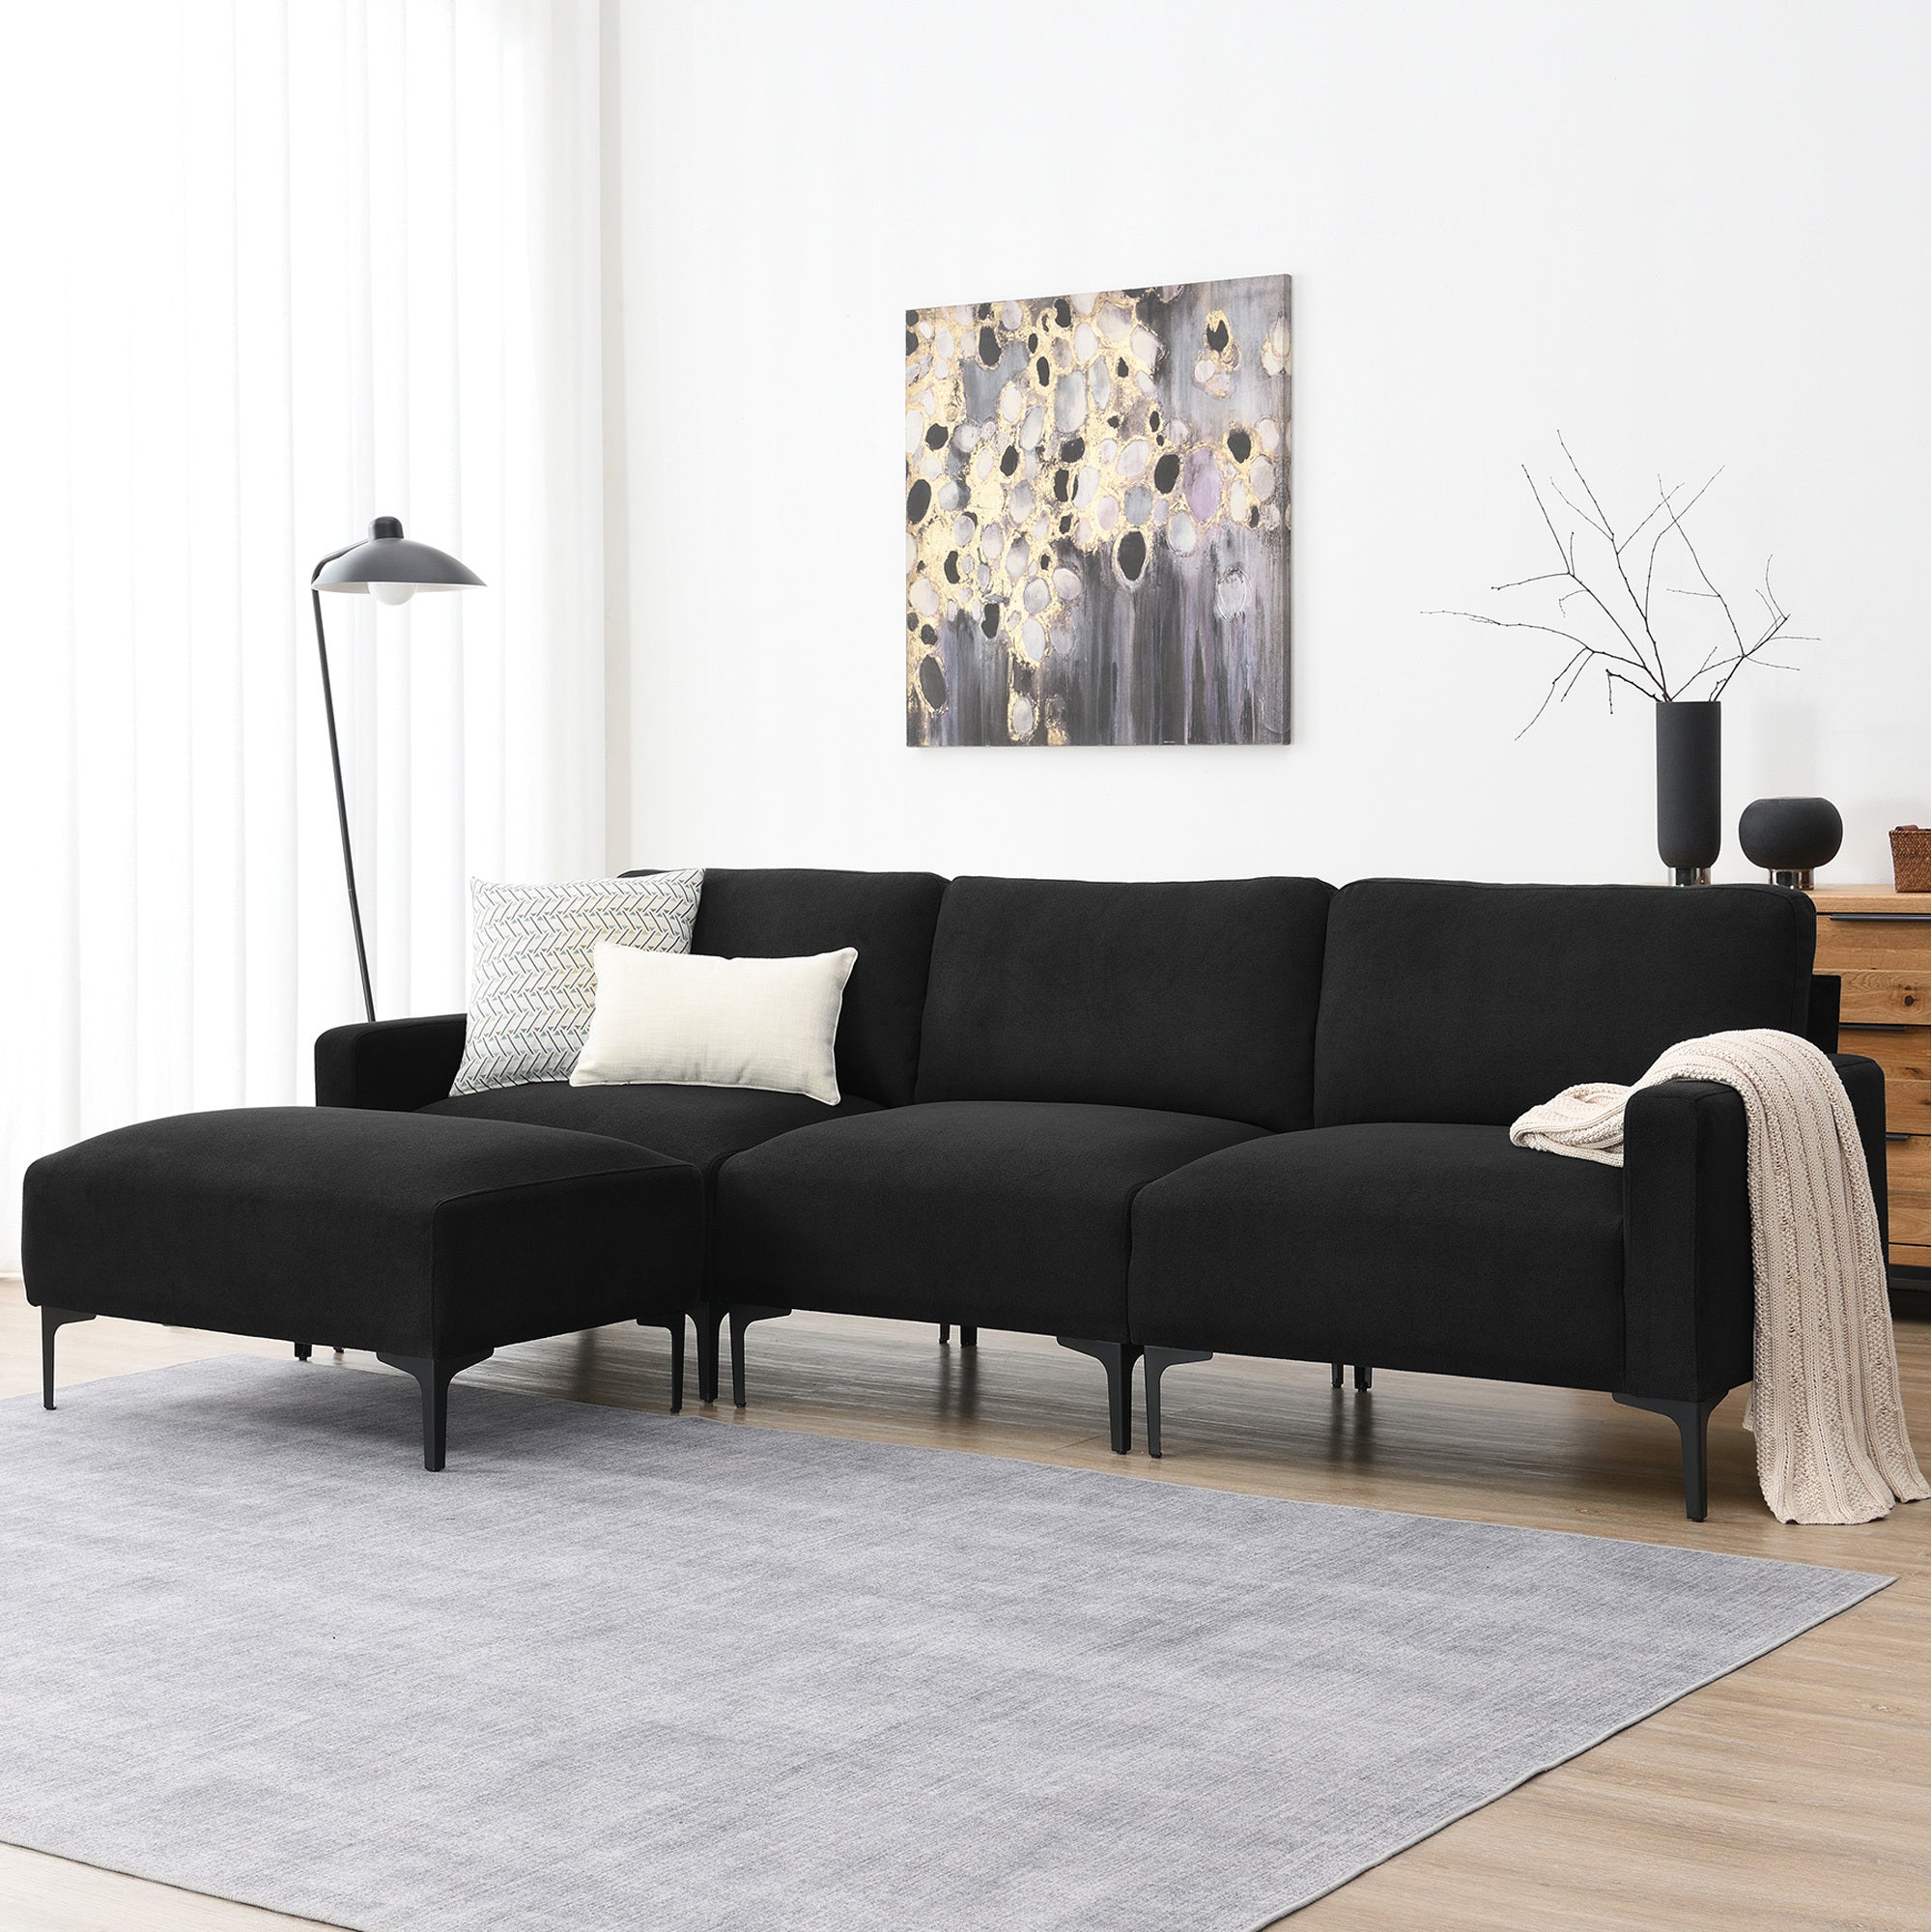 🆓🚛 103.5" Modern L-Shaped Sectional Sofa, 4-Seat Velvet Fabric Couch Set With Convertible Ottoman, Freely Combinable Sofa for Living Room, Apartment, Office, Apartment, Black